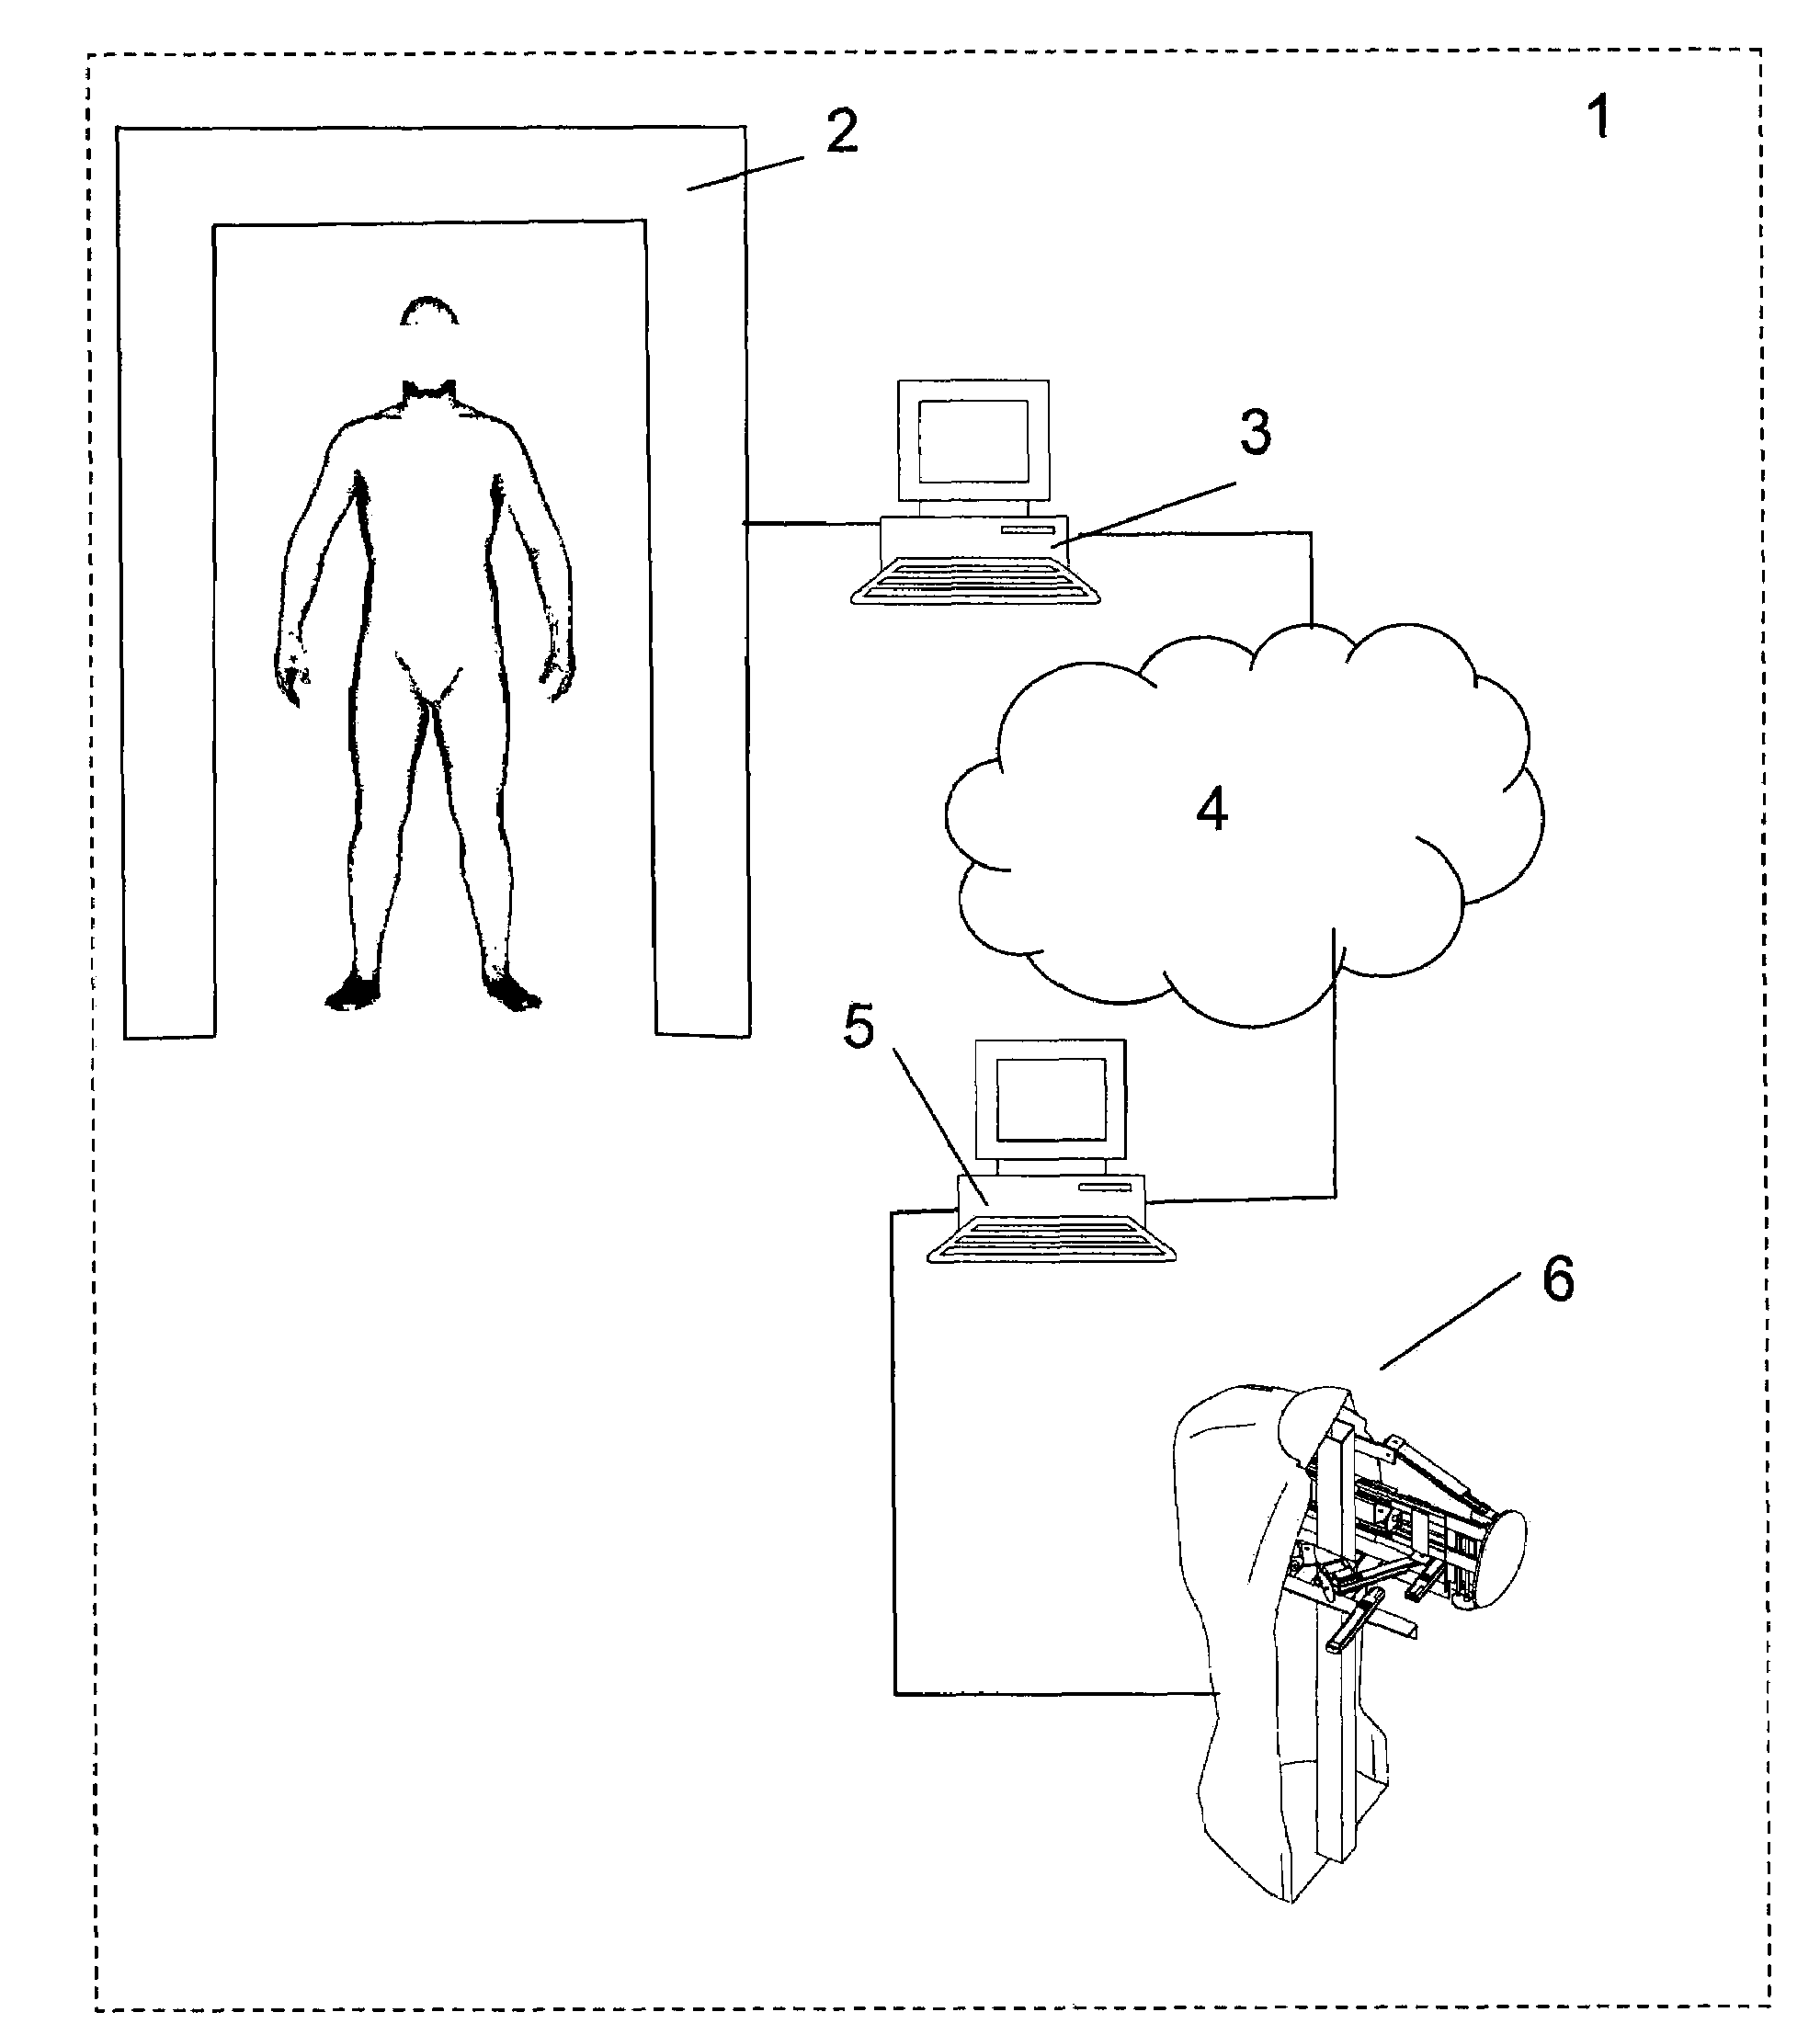 Method and system for custom tailoring and retail sale of clothing